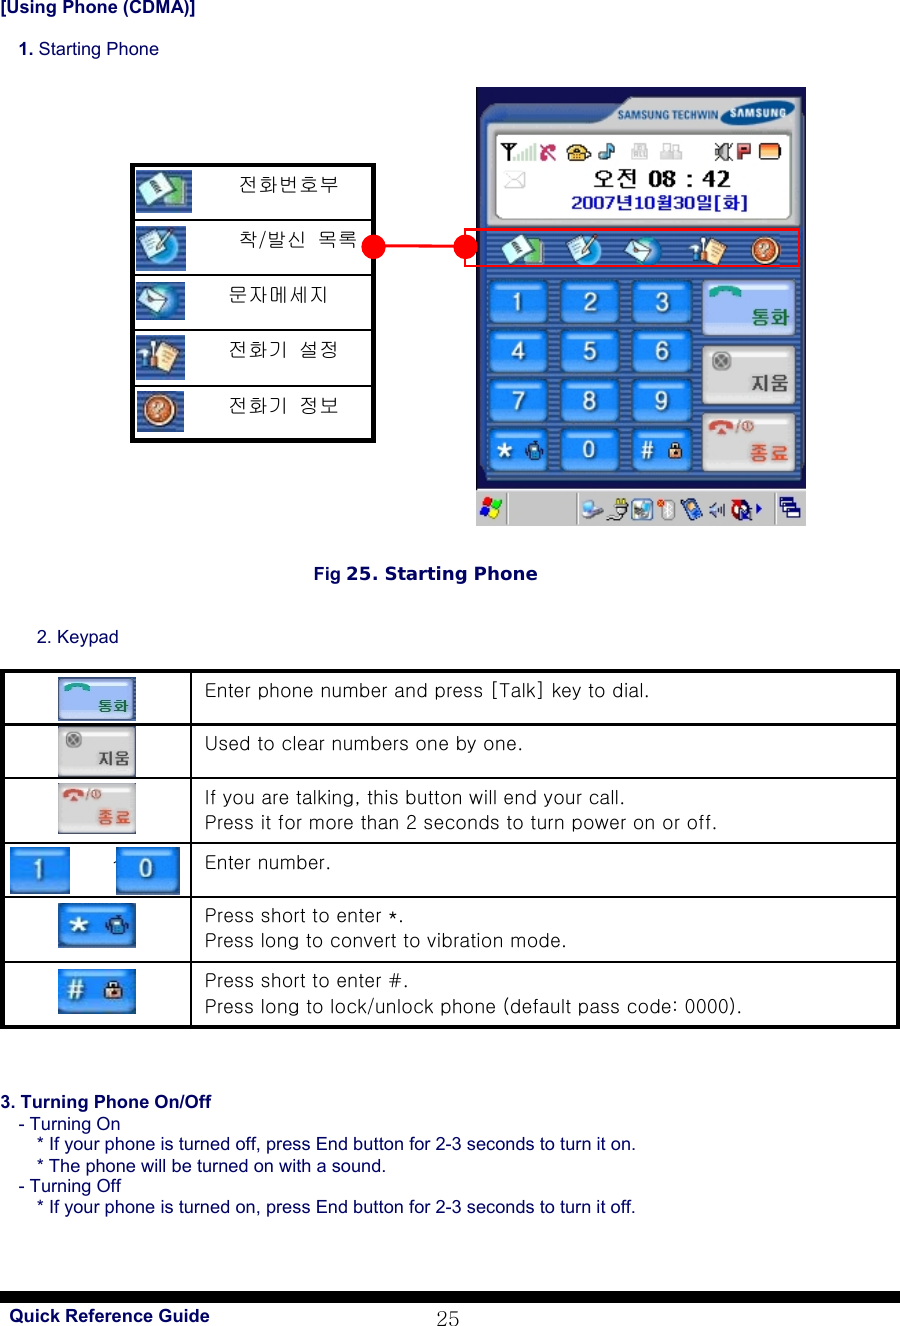   Quick Reference Guide 25[Using Phone (CDMA)]    1. Starting Phone                                                                                                                                      Fig 25. Starting Phone   2. Keypad        3. Turning Phone On/Off - Turning On     * If your phone is turned off, press End button for 2-3 seconds to turn it on.       * The phone will be turned on with a sound. - Turning Off     * If your phone is turned on, press End button for 2-3 seconds to turn it off.   Press short to enter #. Press long to lock/unlock phone (default pass code: 0000).    Press short to enter *. Press long to convert to vibration mode.    Enter number.           ~  If you are talking, this button will end your call.   Press it for more than 2 seconds to turn power on or off.    Used to clear numbers one by one.    Enter phone number and press [Talk] key to dial.                    전화기  정보                 전화기  설정         문자메세지          착/발신 목록                  전화번호부 